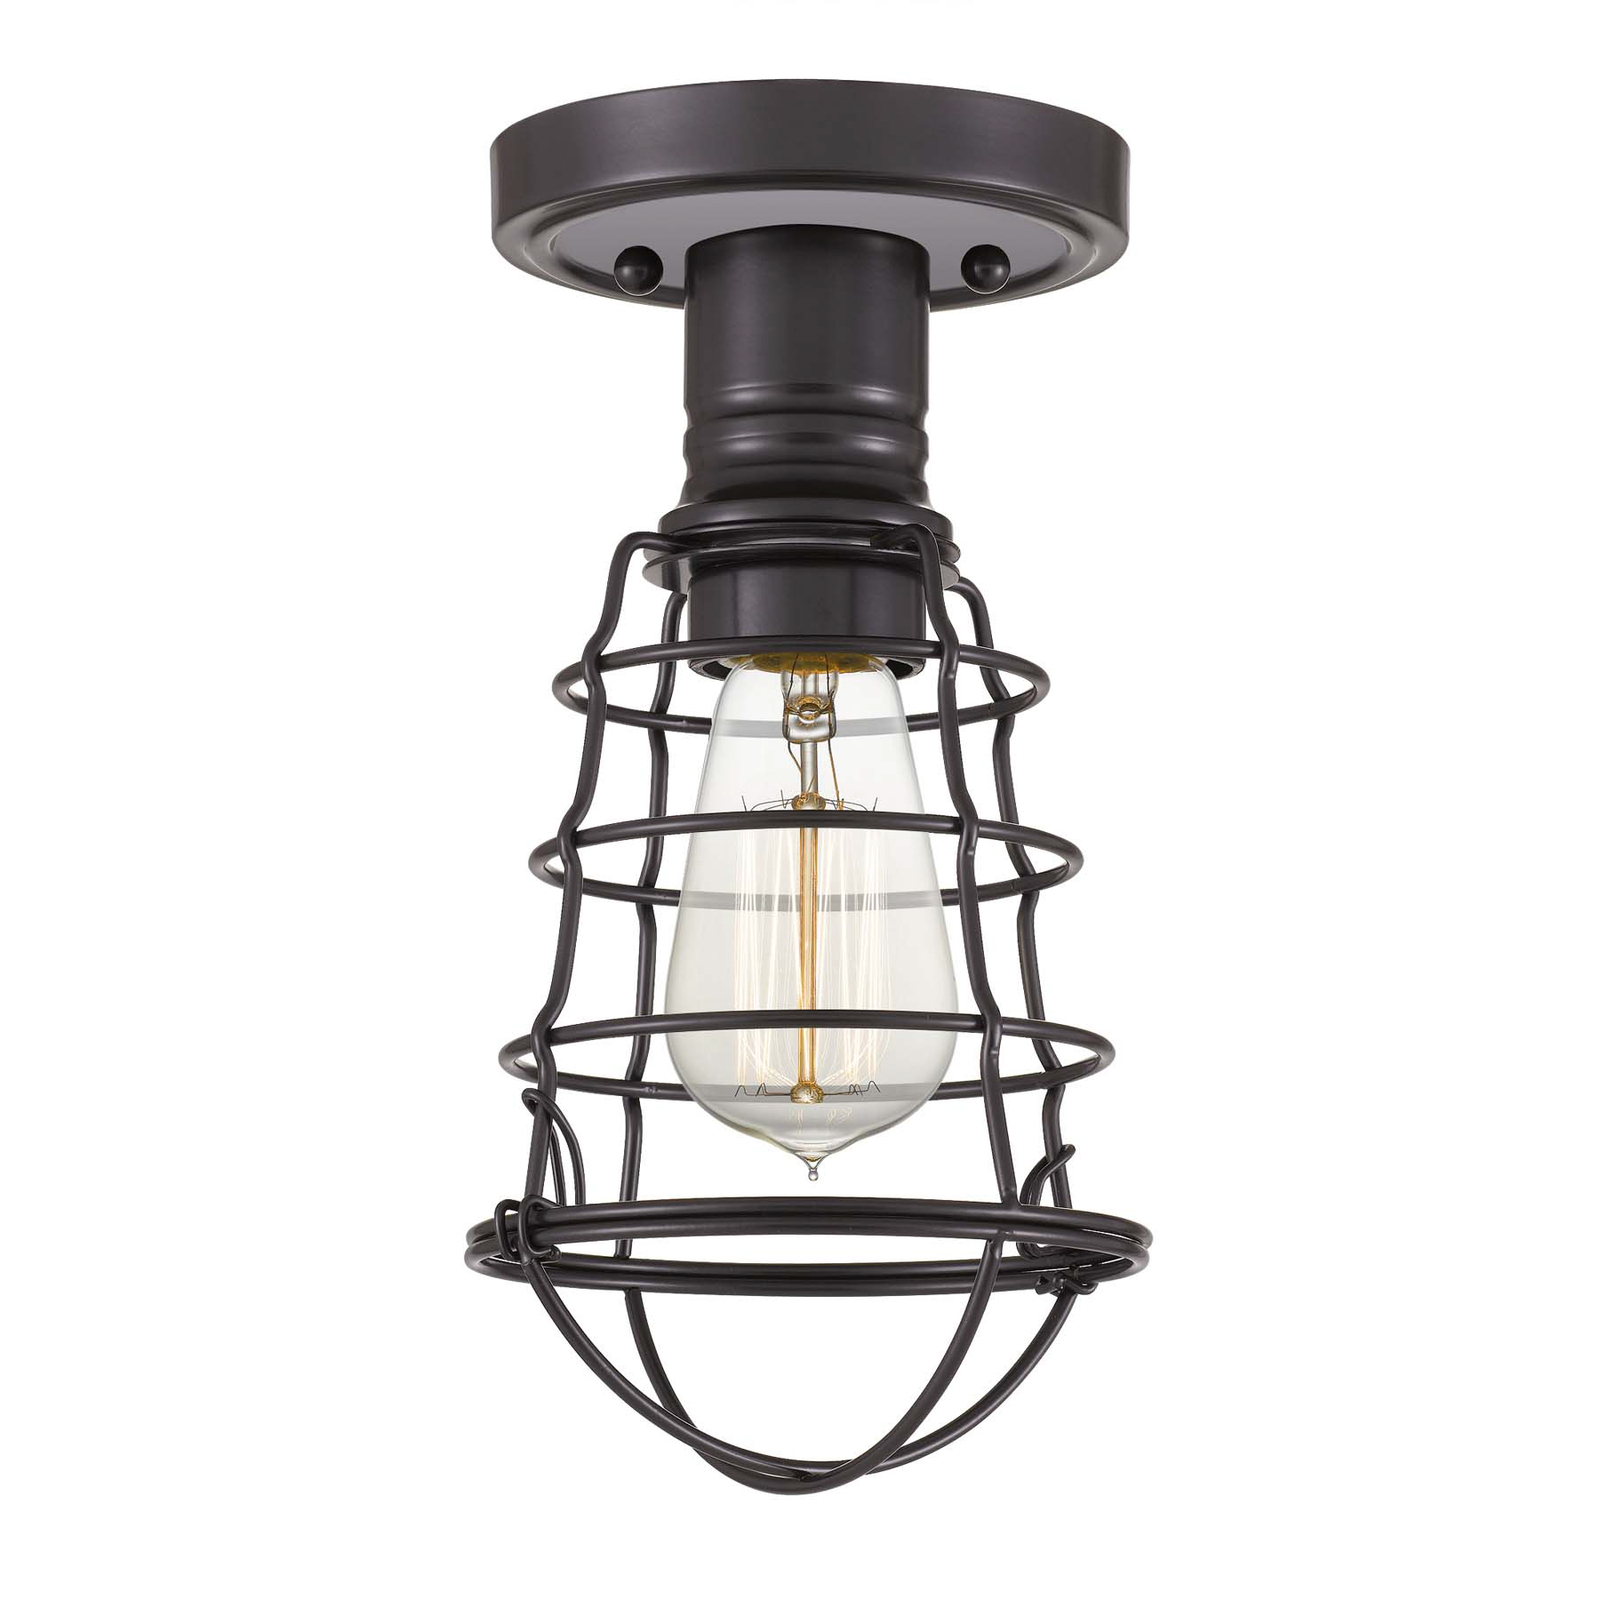 Mite ceiling light with metal cage, bronze